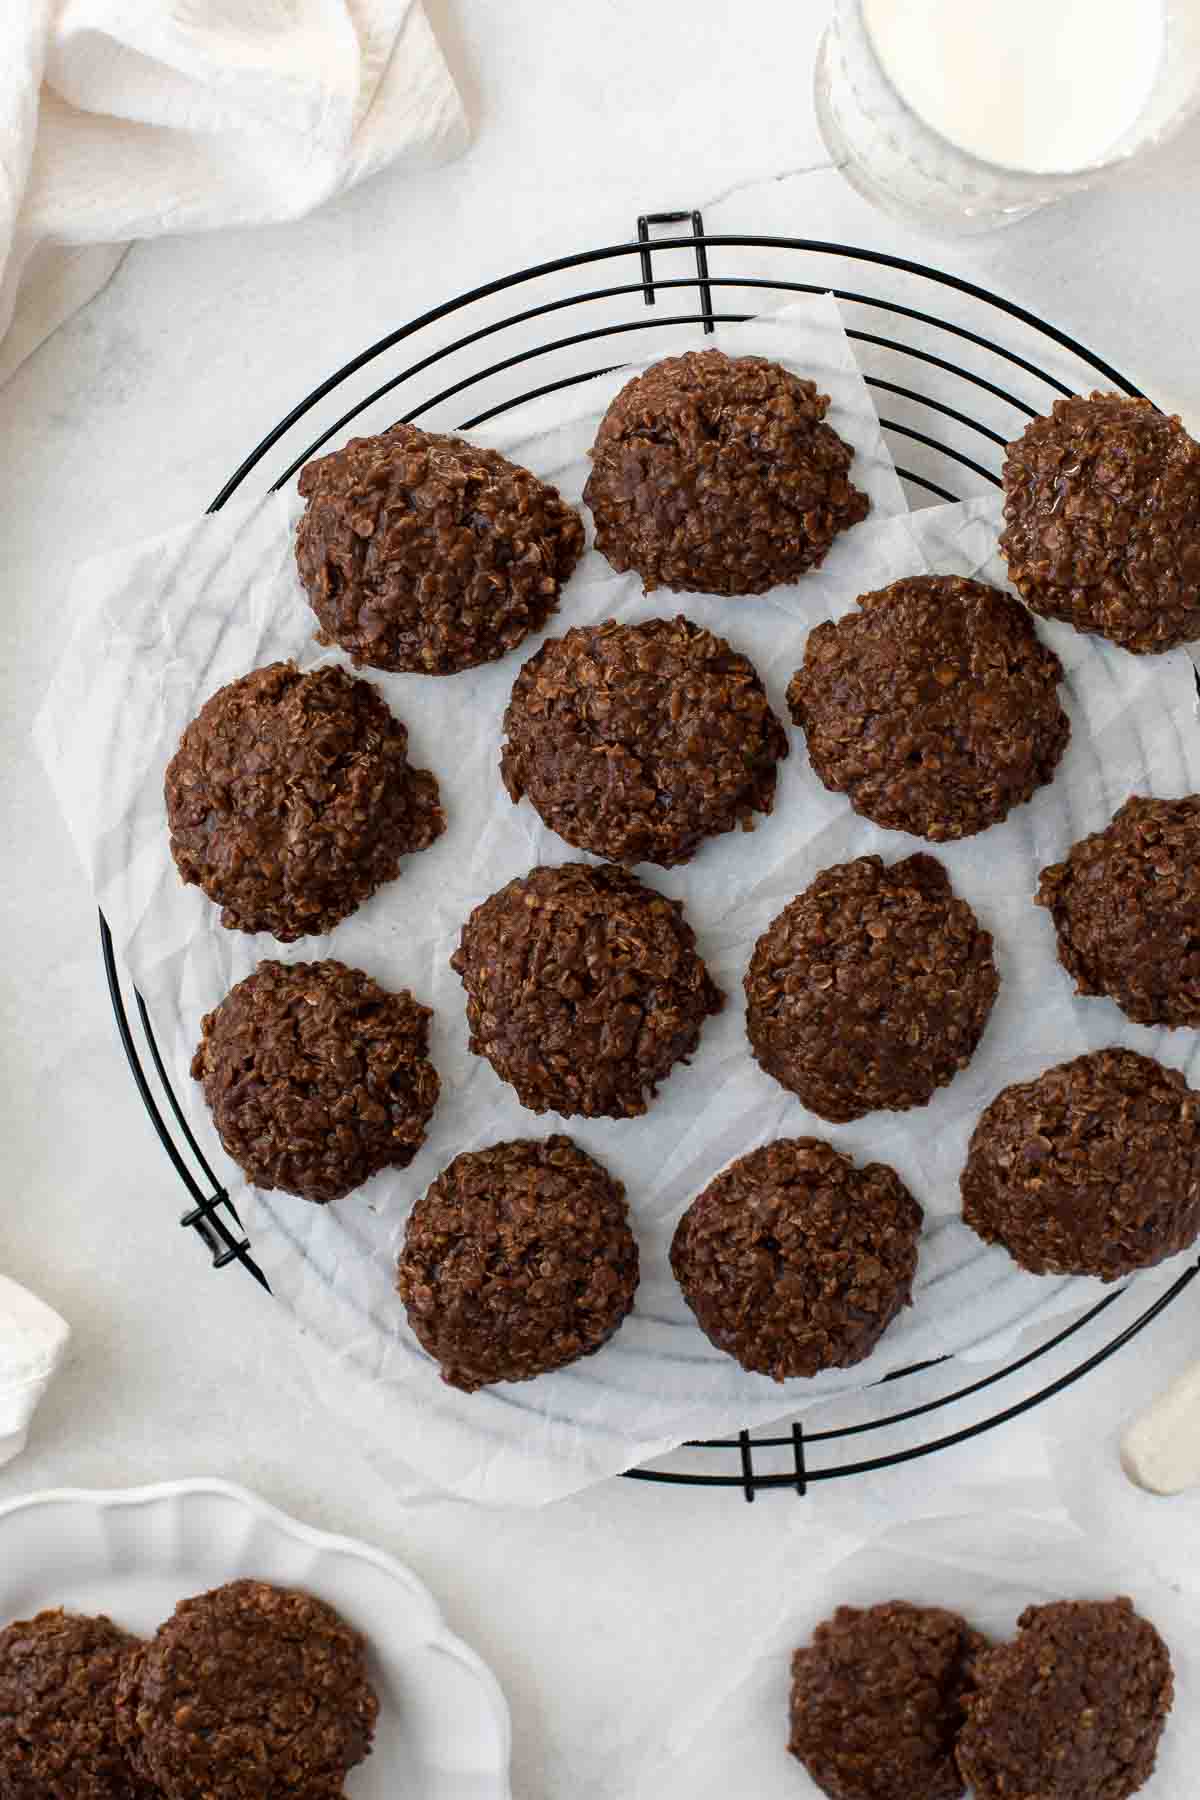 Easy gluten-free chocolate oatmeal cookies on a cooling rack.